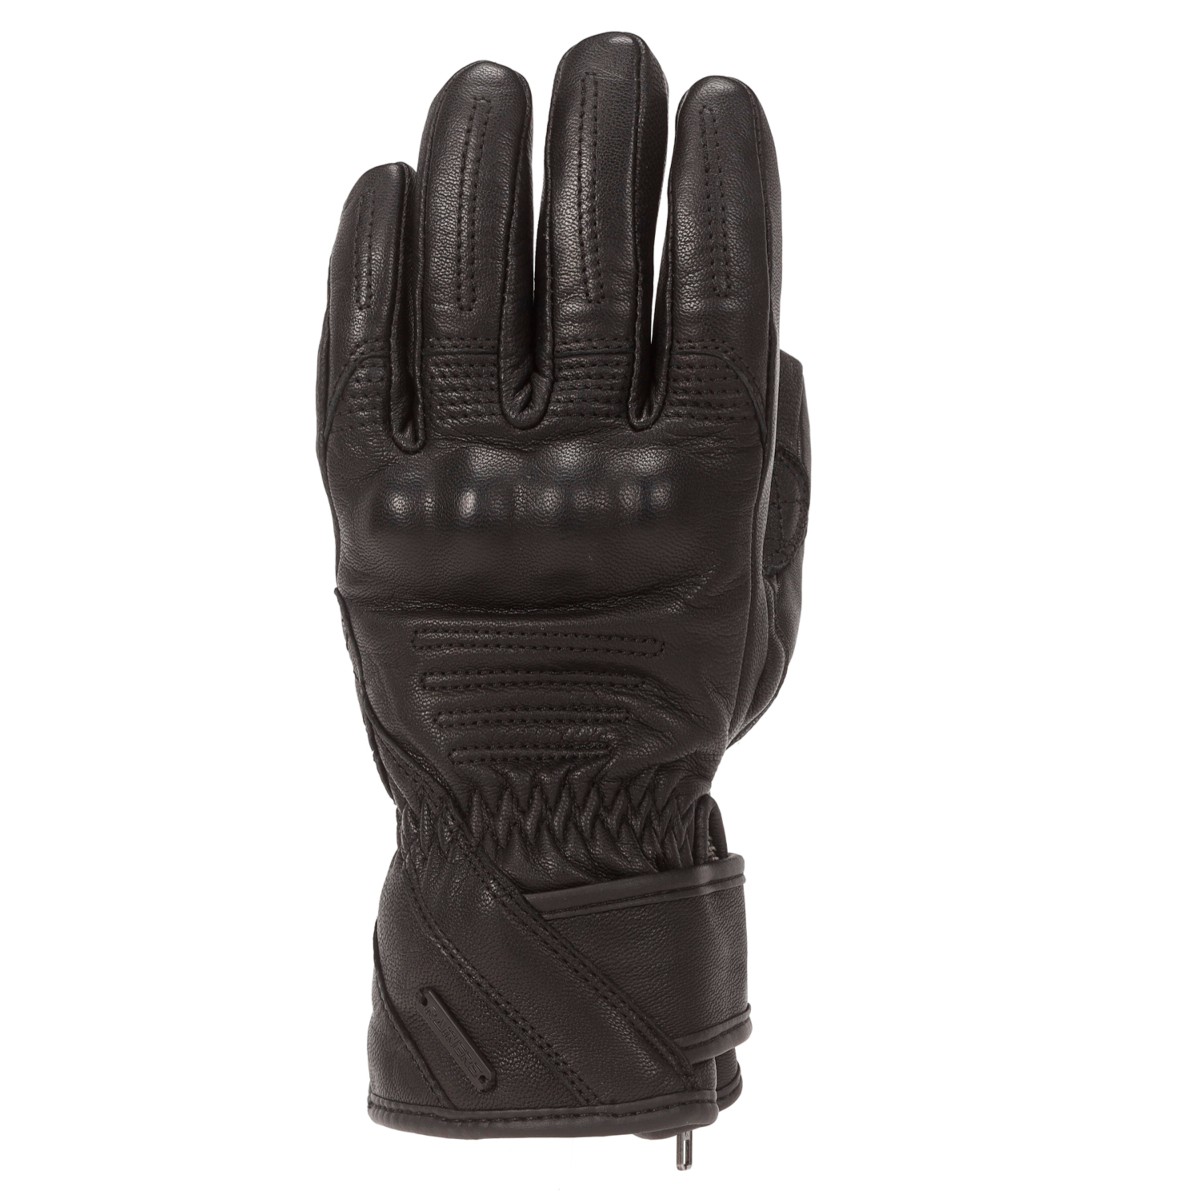 Guantes RAINERS GINA NEGROS MUJER INVIERNO IMPERM.